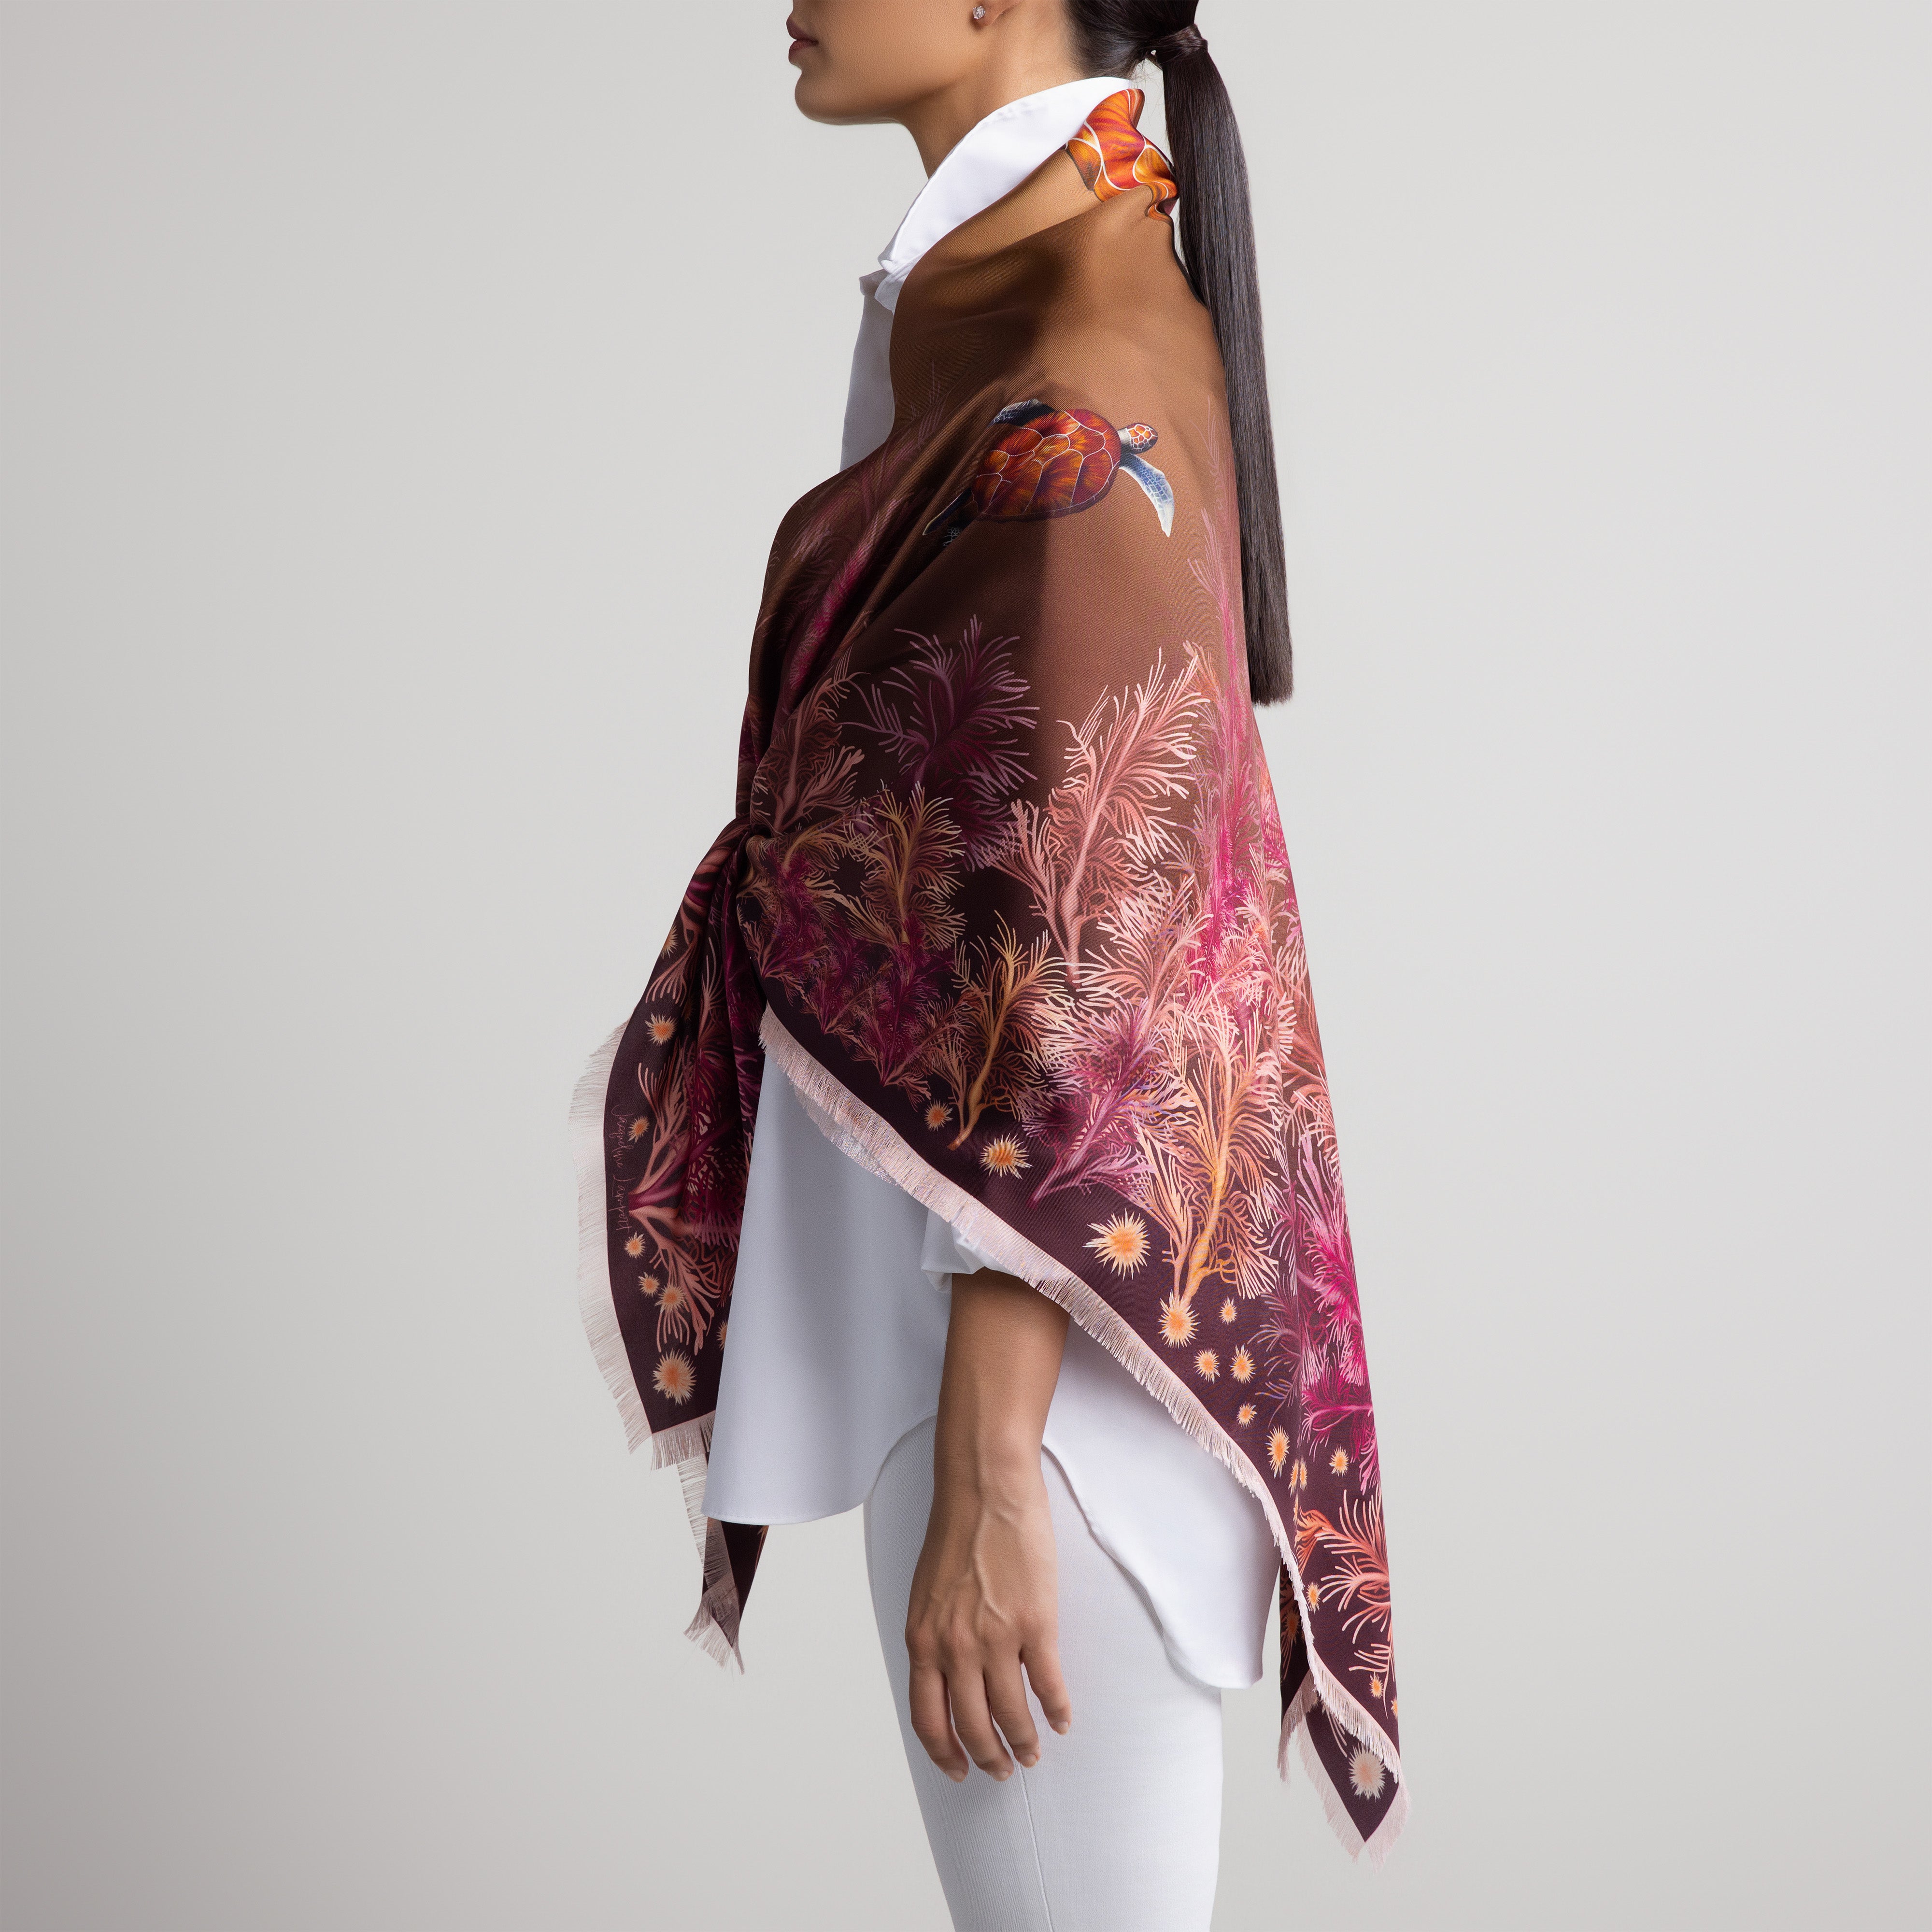 Galapagos Grande Silk Scarf in Brown Ombré with Hand-Feathered Edges